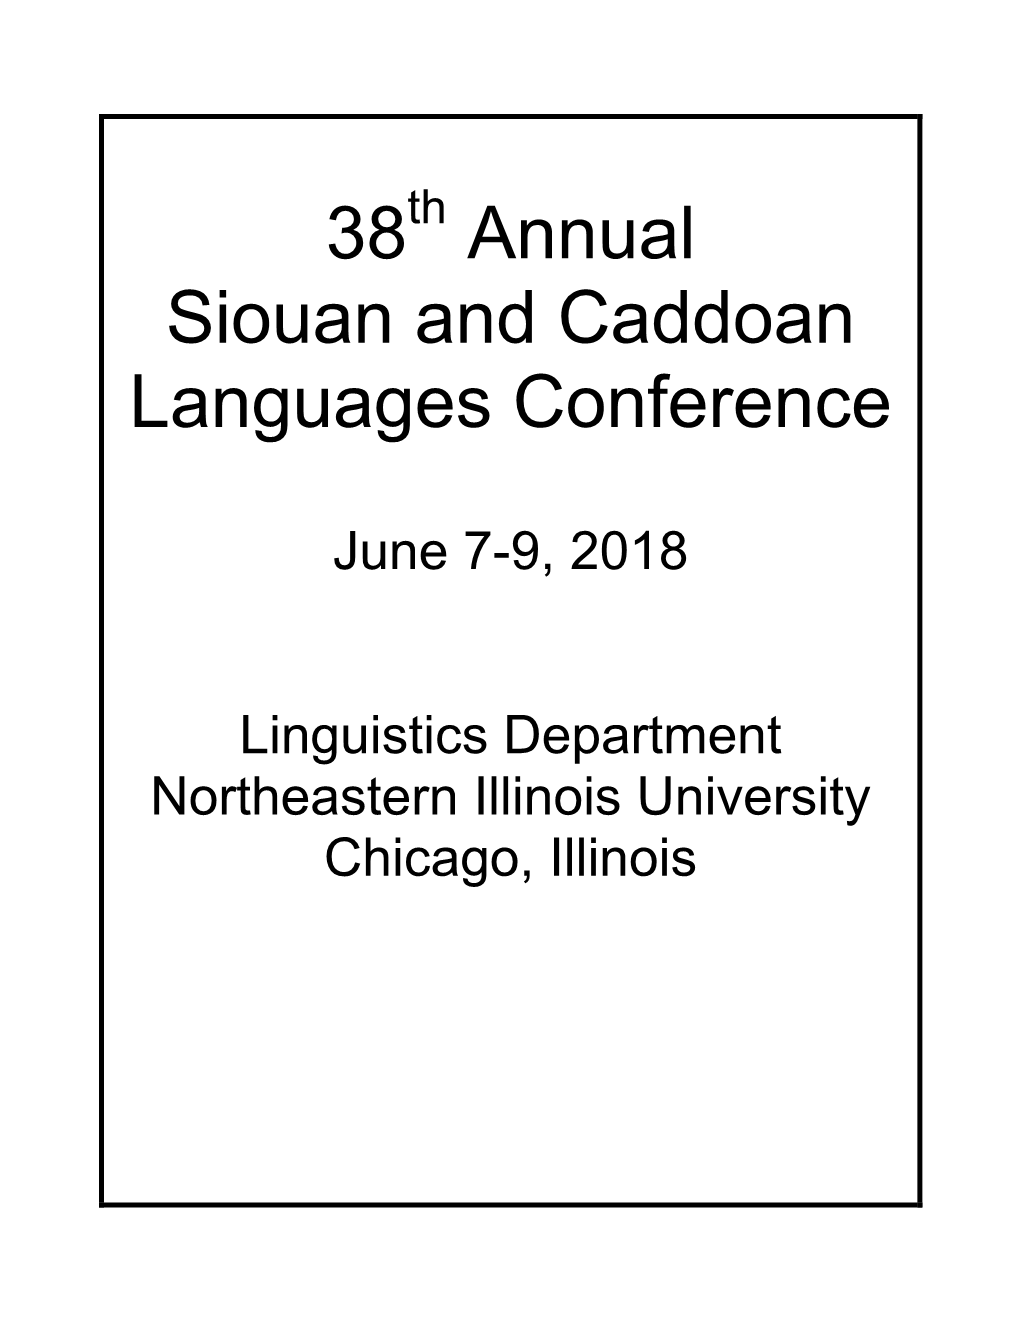 38Th Annual Siouan and Caddoan Languages Conference Program